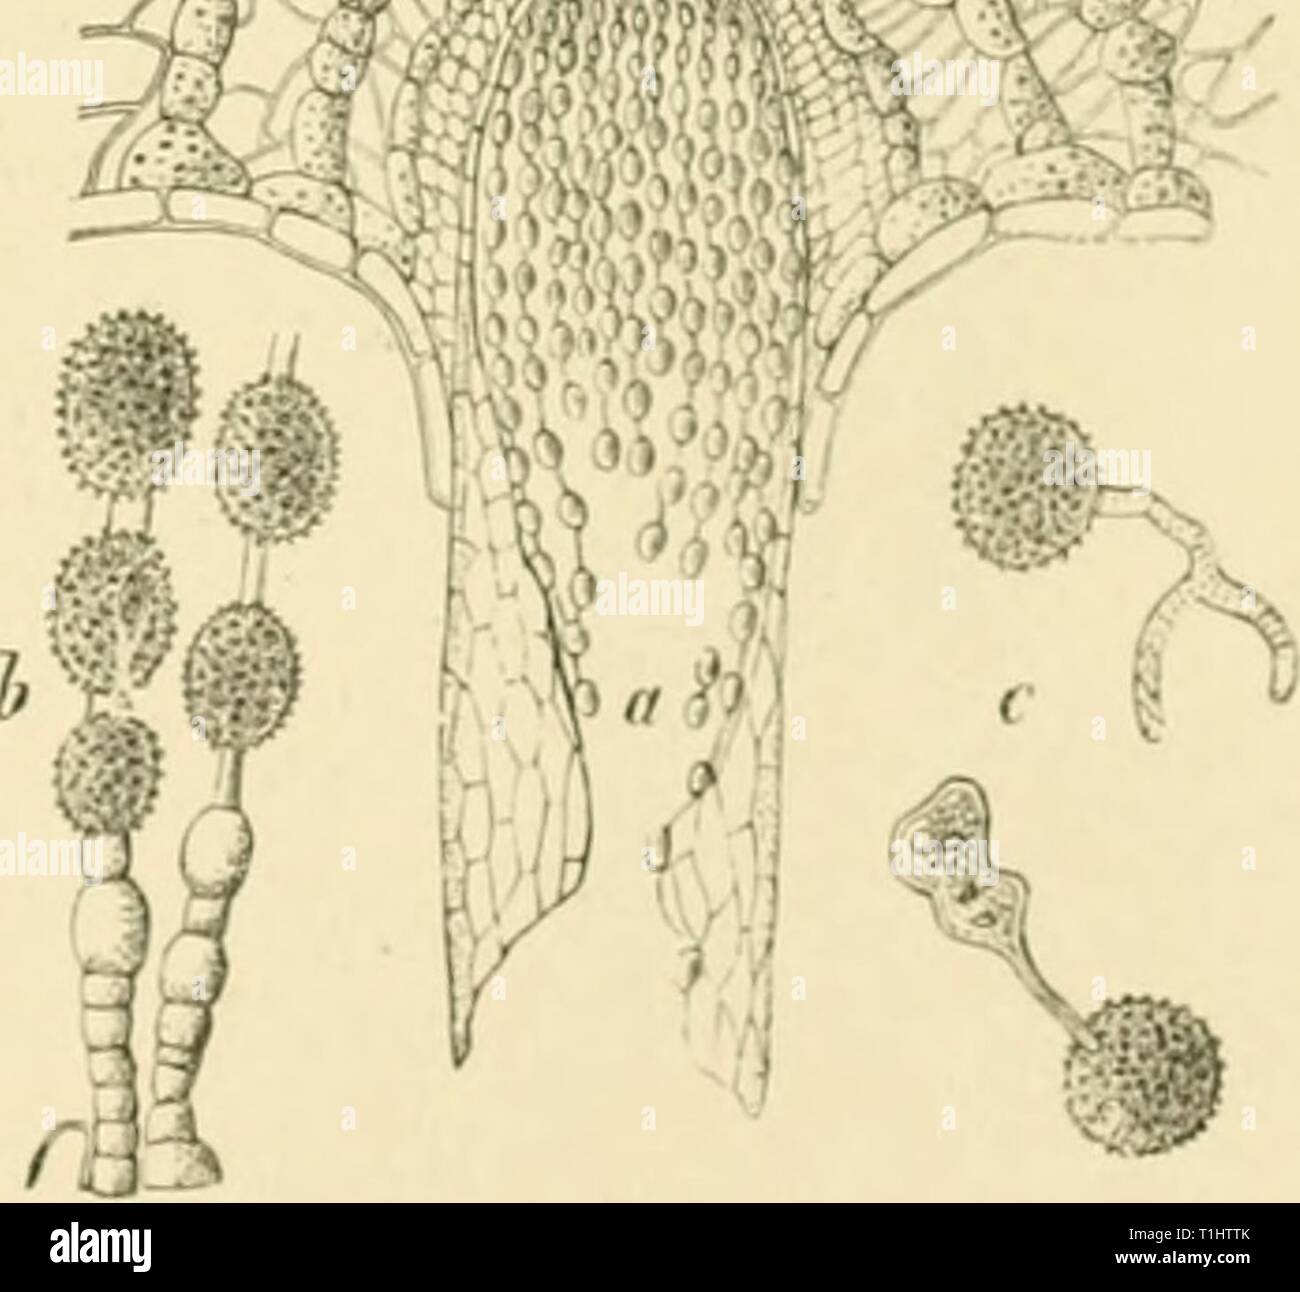 Diseases of plants induced by Diseases of plants induced by cryptogamic parasites; introduction to the study of pathogenic Fungi, slime-Fungi, bacteria, & Algae  diseasesofplants00tube Year: 1897  Fio. 205.—CulypiOKpora OoipiKAiano. Aecidia on the under surface of needles of Silver Fir. (v. Tubeuf del.) 'mw    Fici. 206.—Aecidium in a needle of Silver Fir (much enUirged). b. Series of aecidiospores and intermediate celLs. c Germinating aecidiospores. (After R. Hartig.) Tliis aecidium is also found on Ahys cvphalonicfi in U])per Bavaria. Barclayella deformans Diet.' This lias been found in the  Stock Photo